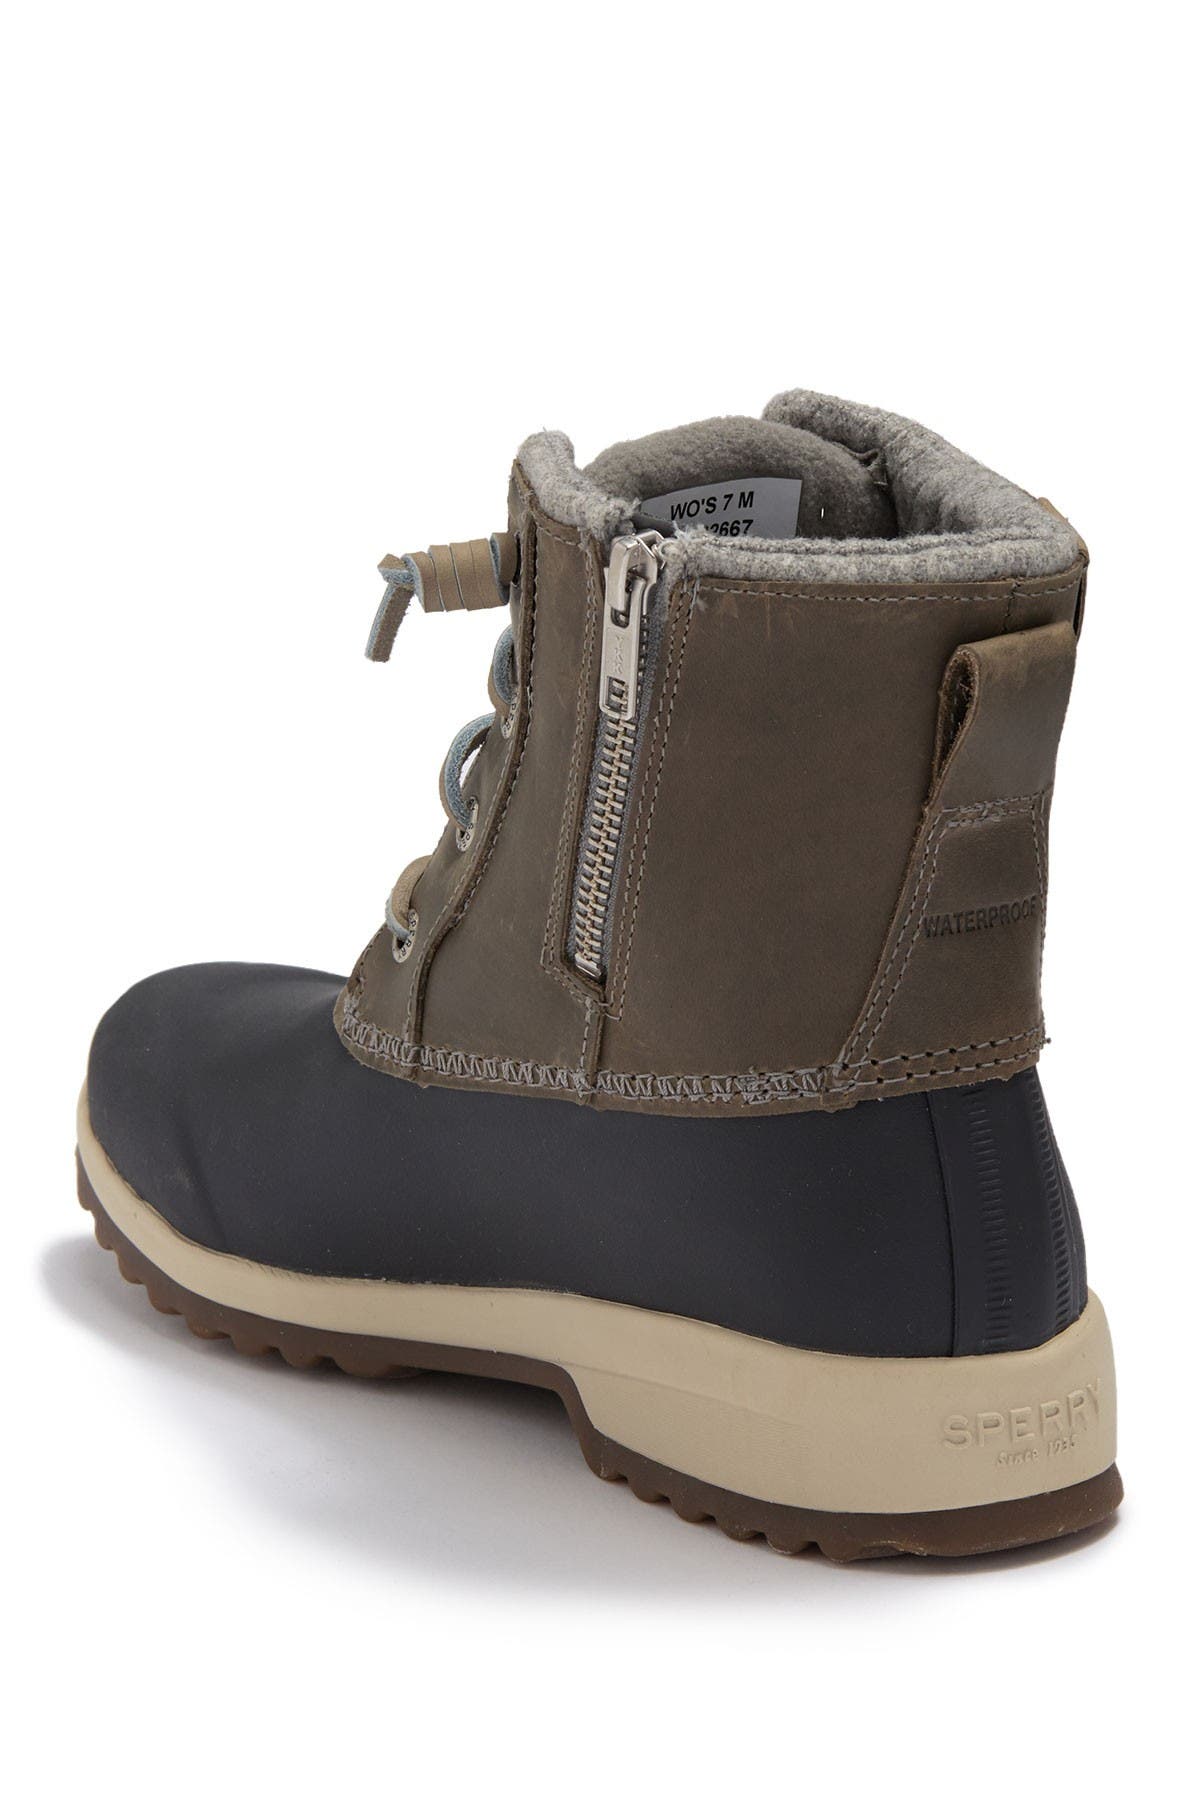 sperry boots maritime repel